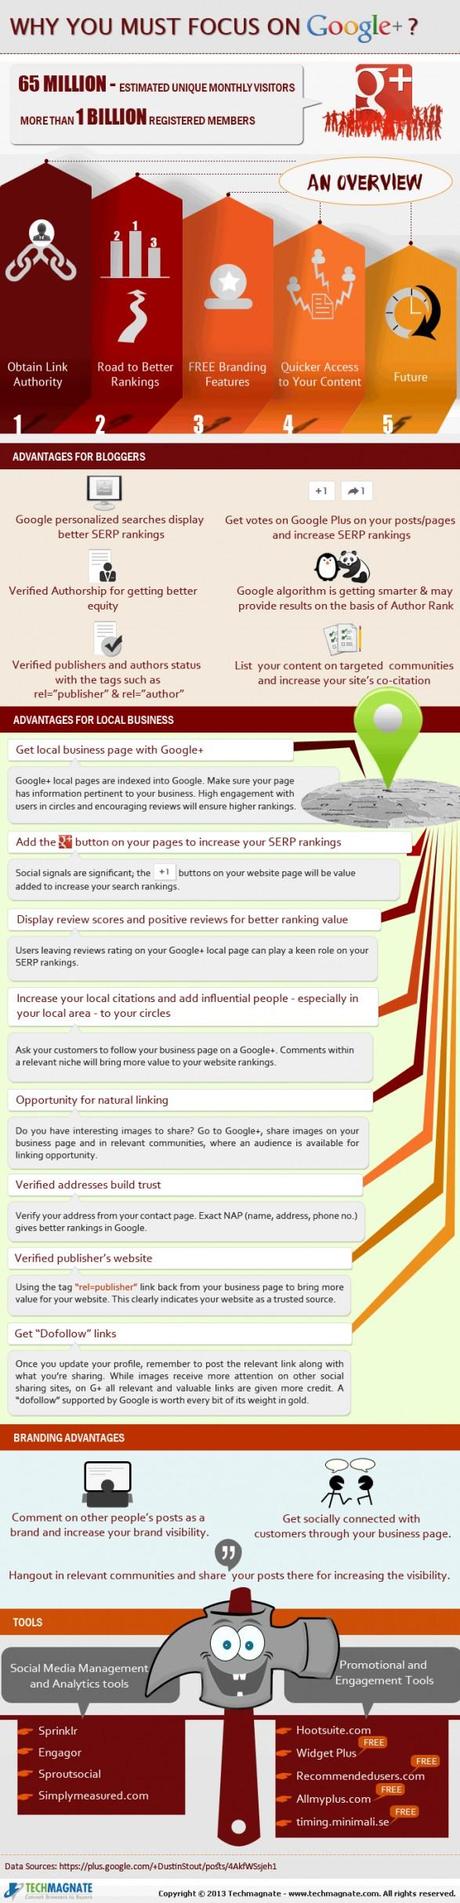 Why you must focus on Google Plus?